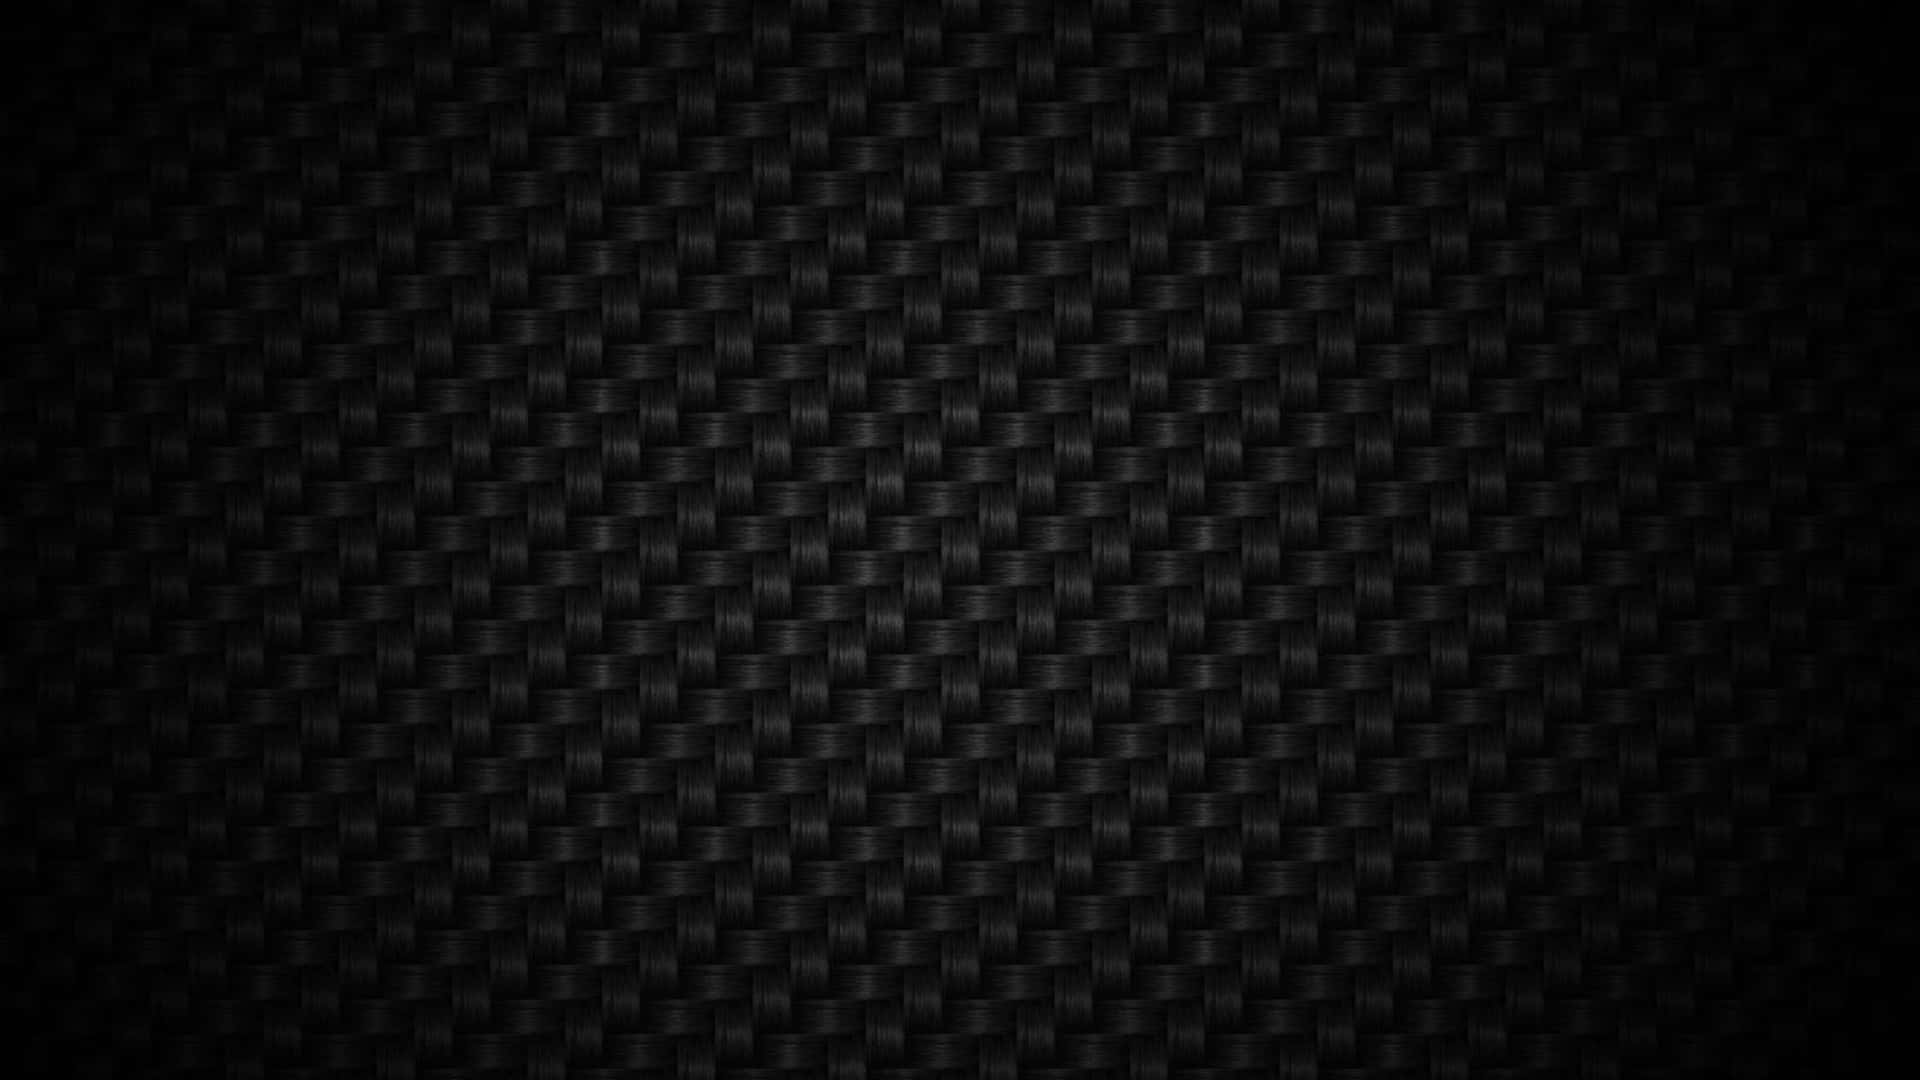 Image  Zoom Background of a Darkened Room with a Computer Screen